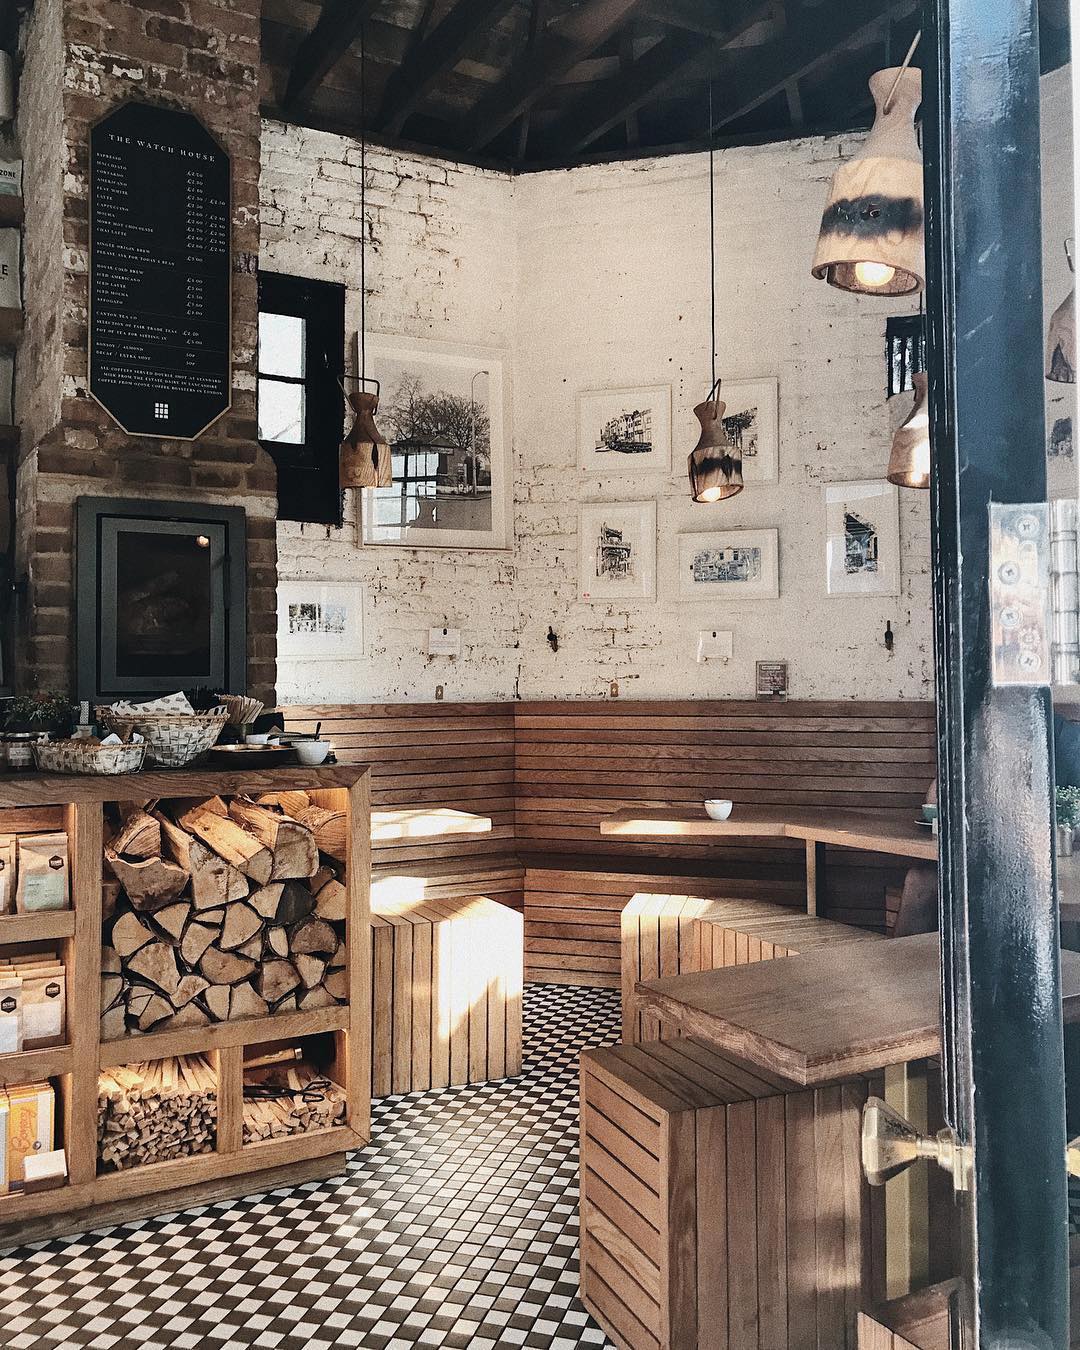 The Scandi-esque interiors of The WatchHouse in Bermondsey – one of the best things to do in Bermondsey.